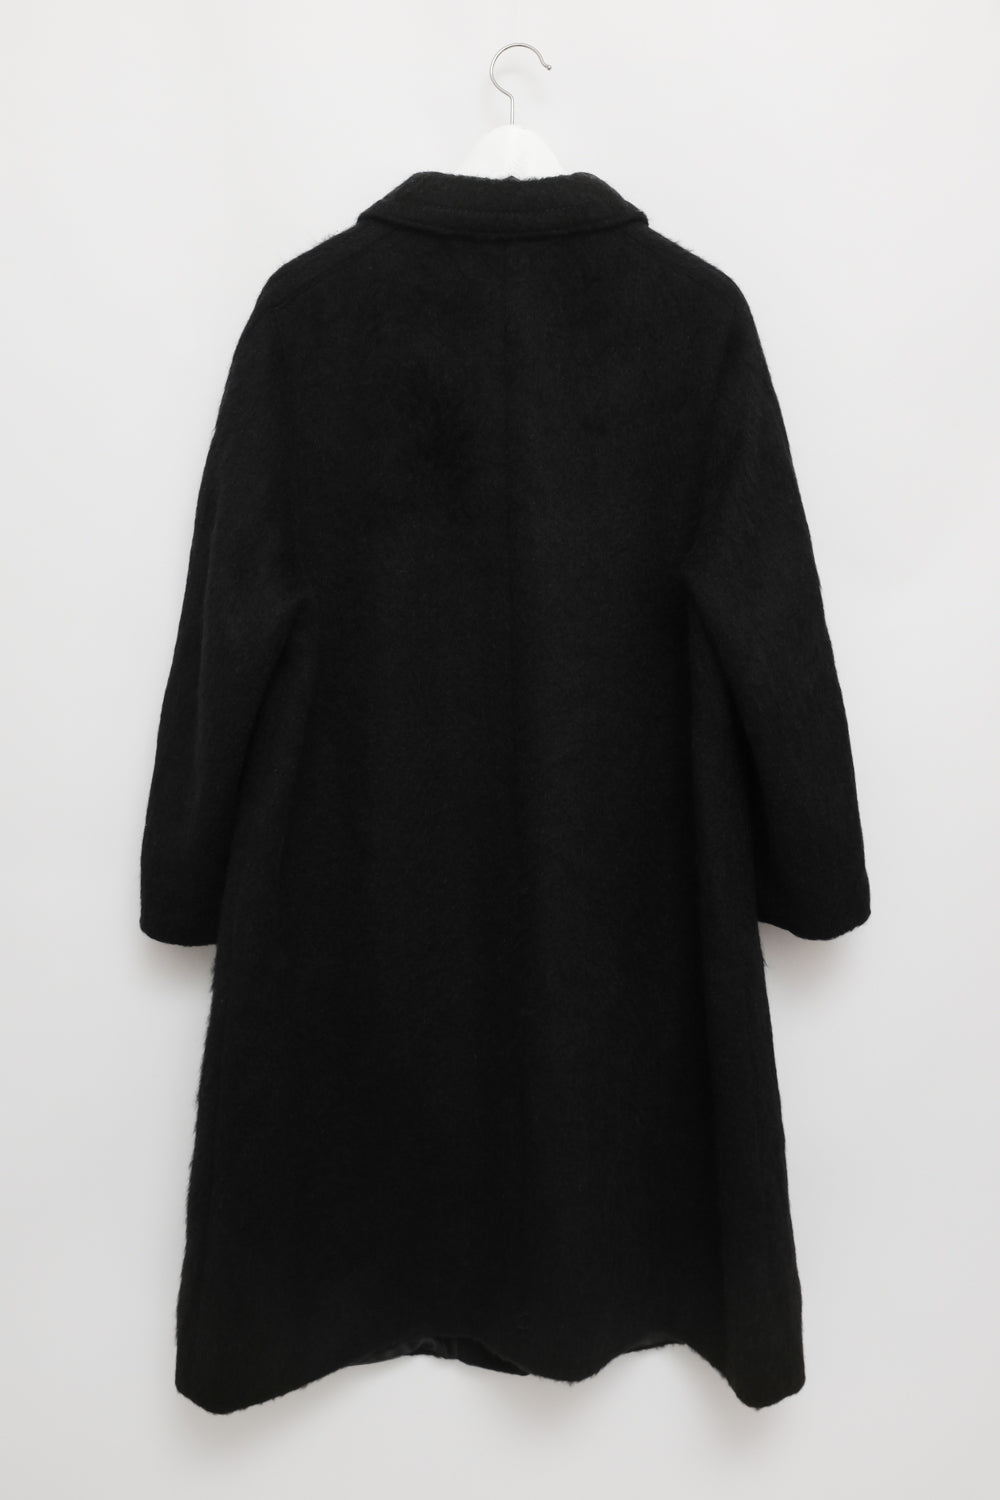 PURE WOOL FLUFFY BLACK OVER COAT